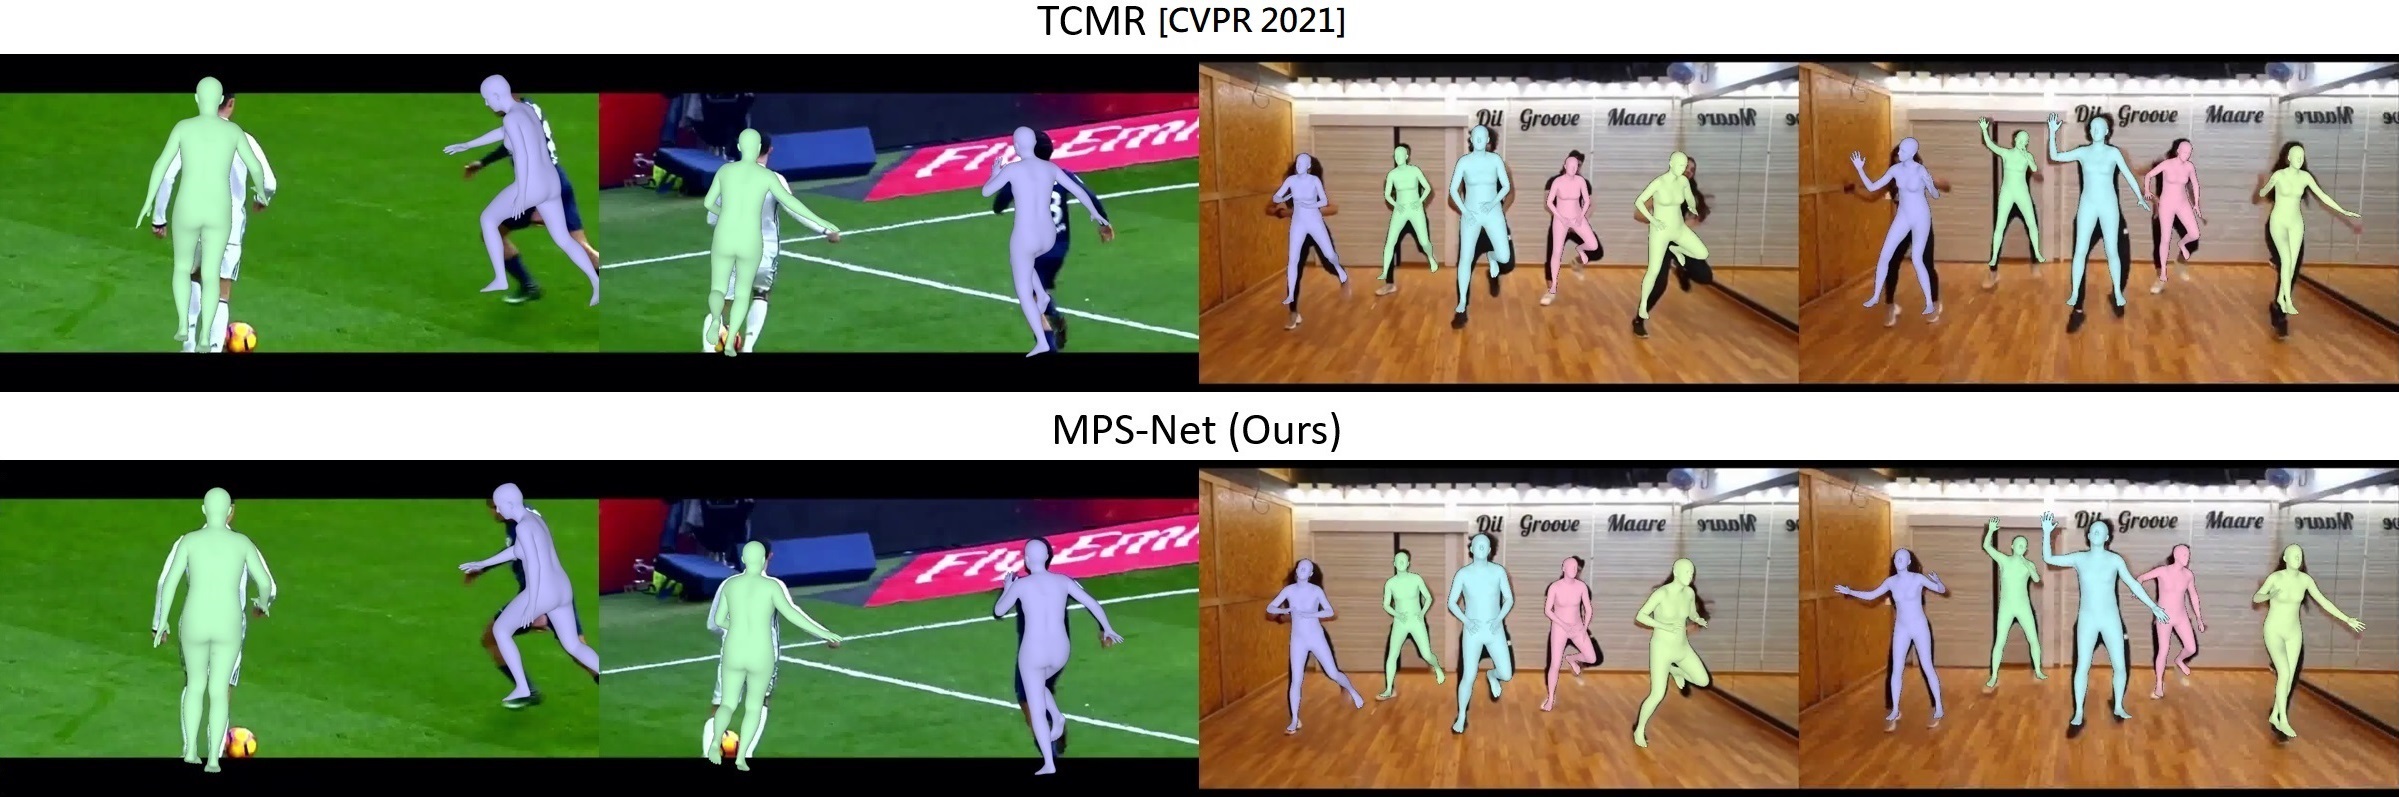 Figure 3: Comparison of our MPS-Net with the state-of-the-art method TCMR for 3D pose and shape estimation.